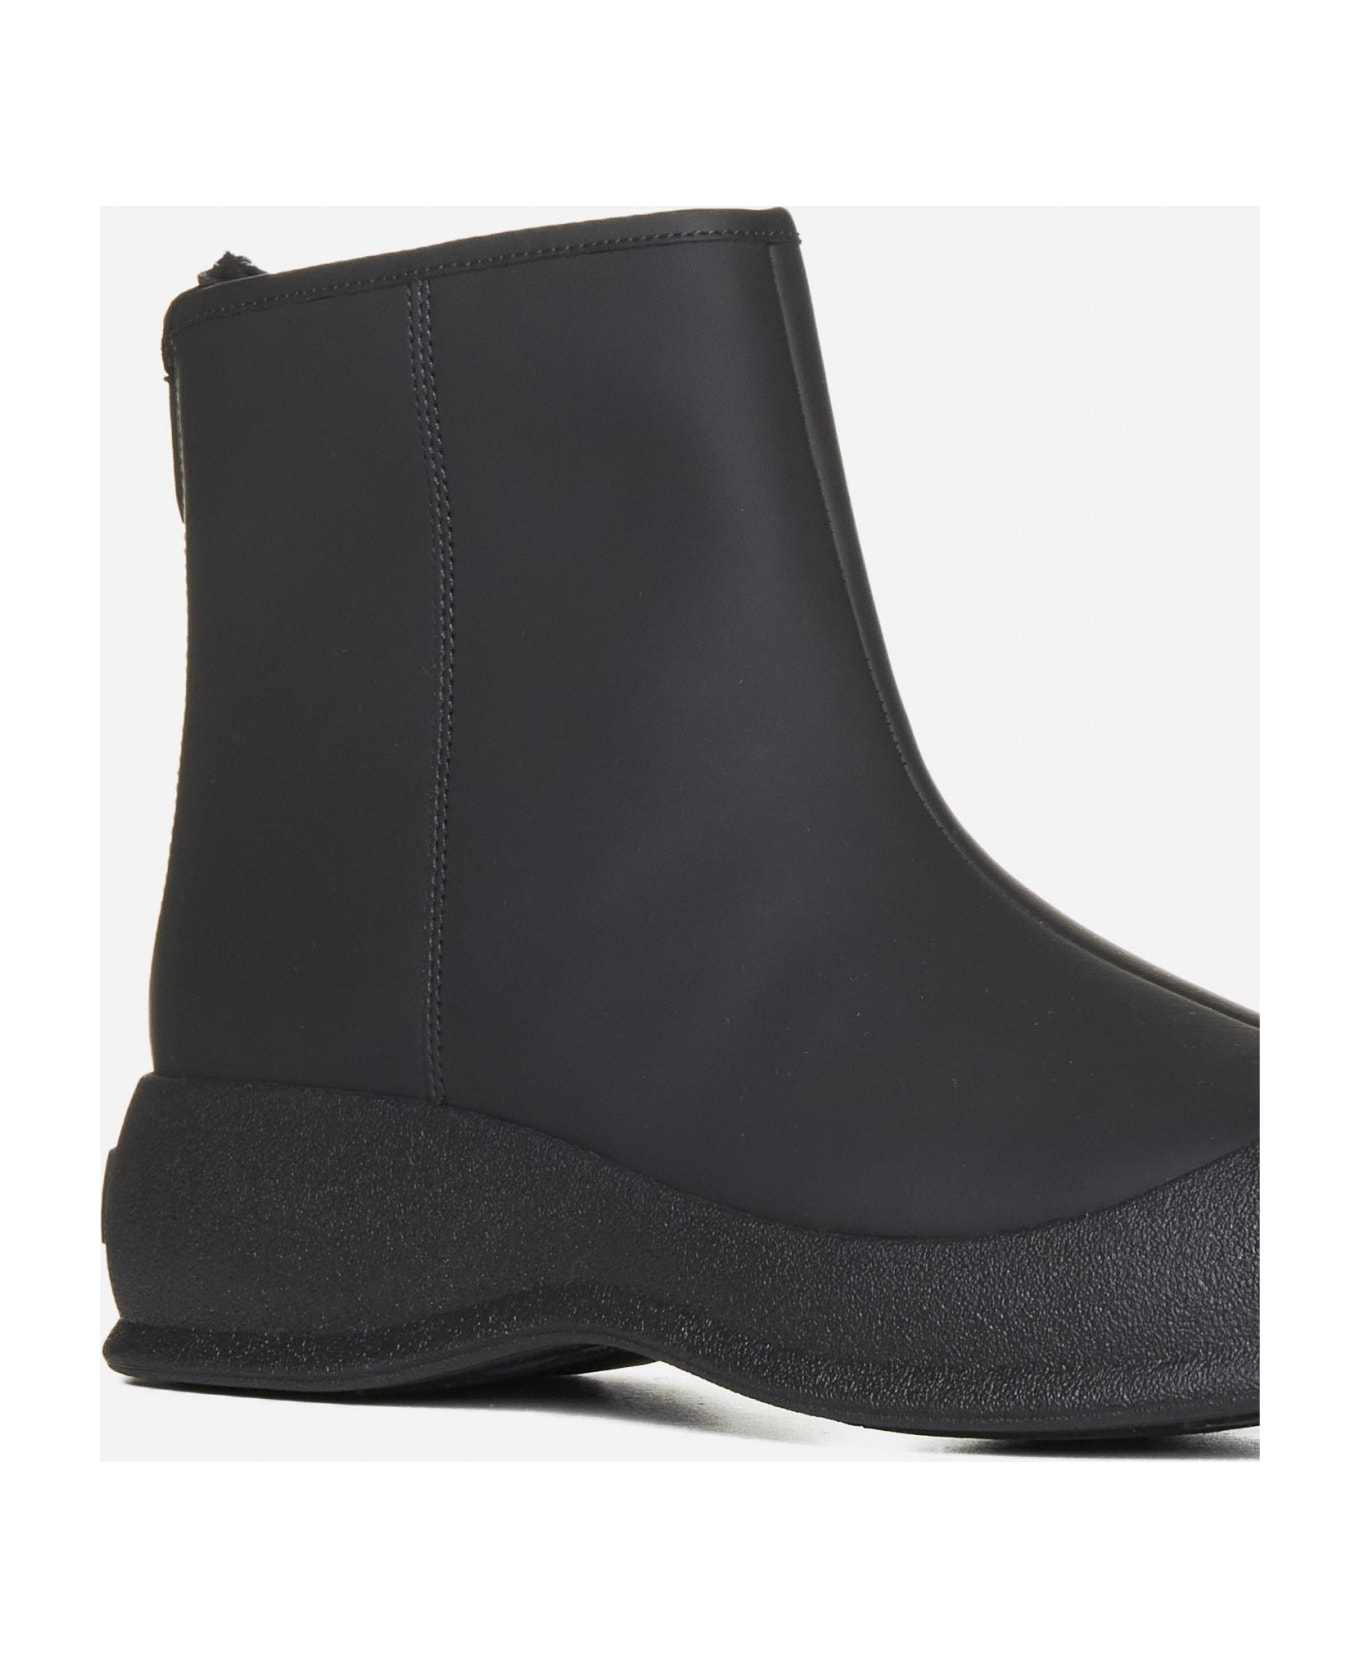 Bally Carsey Coated Leather Ankle Boots - Black